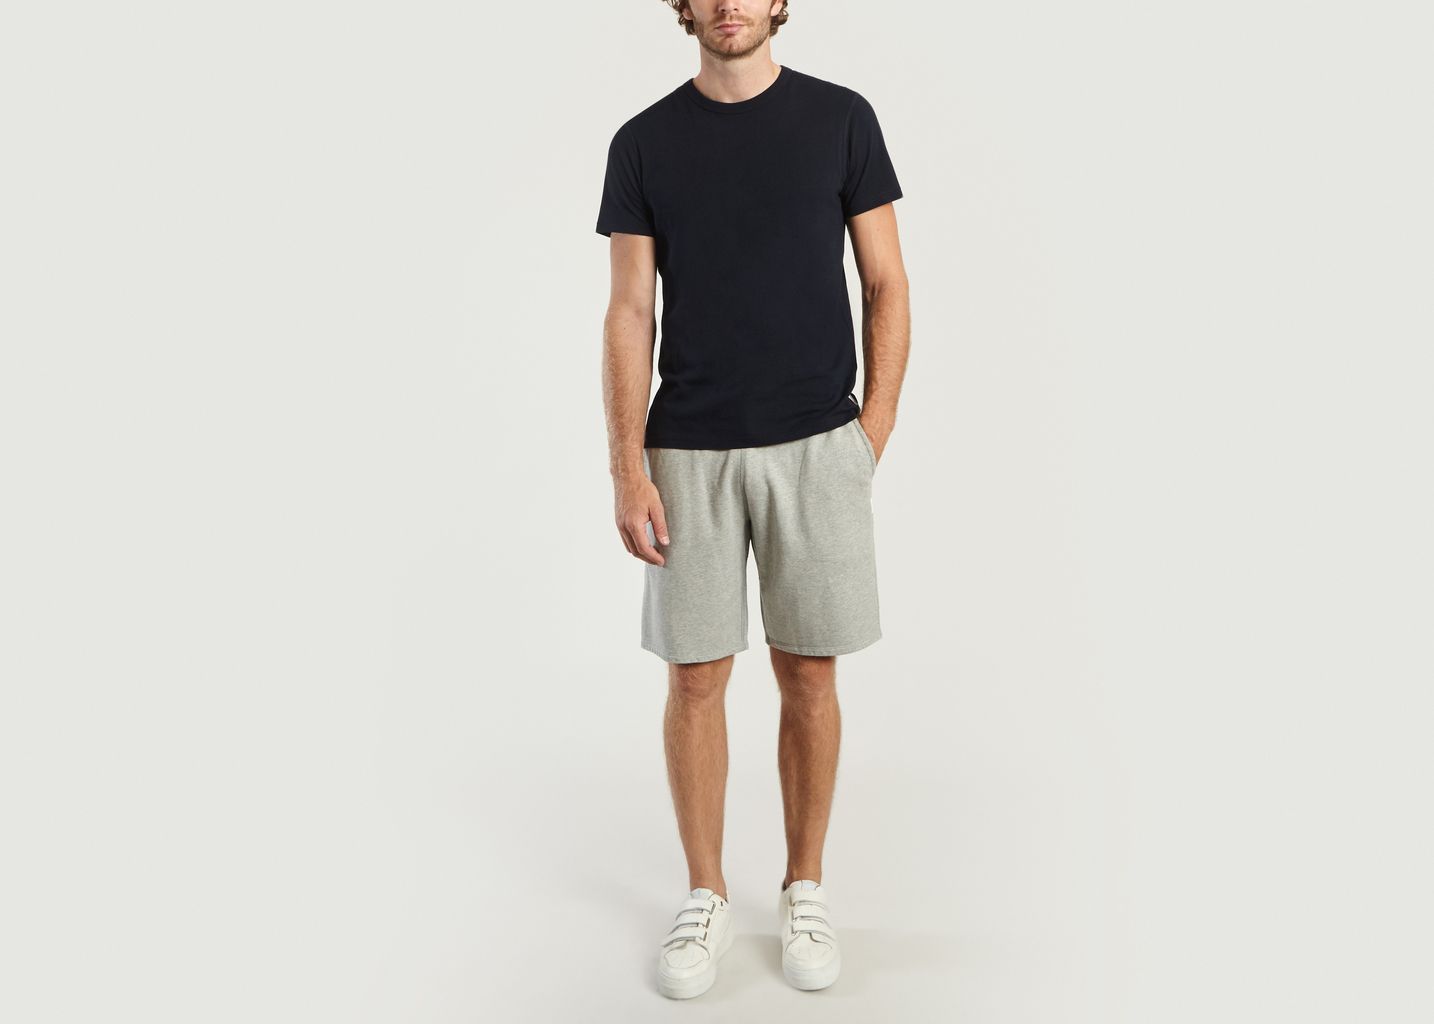 Fleece Lined Shorts - Reigning Champ